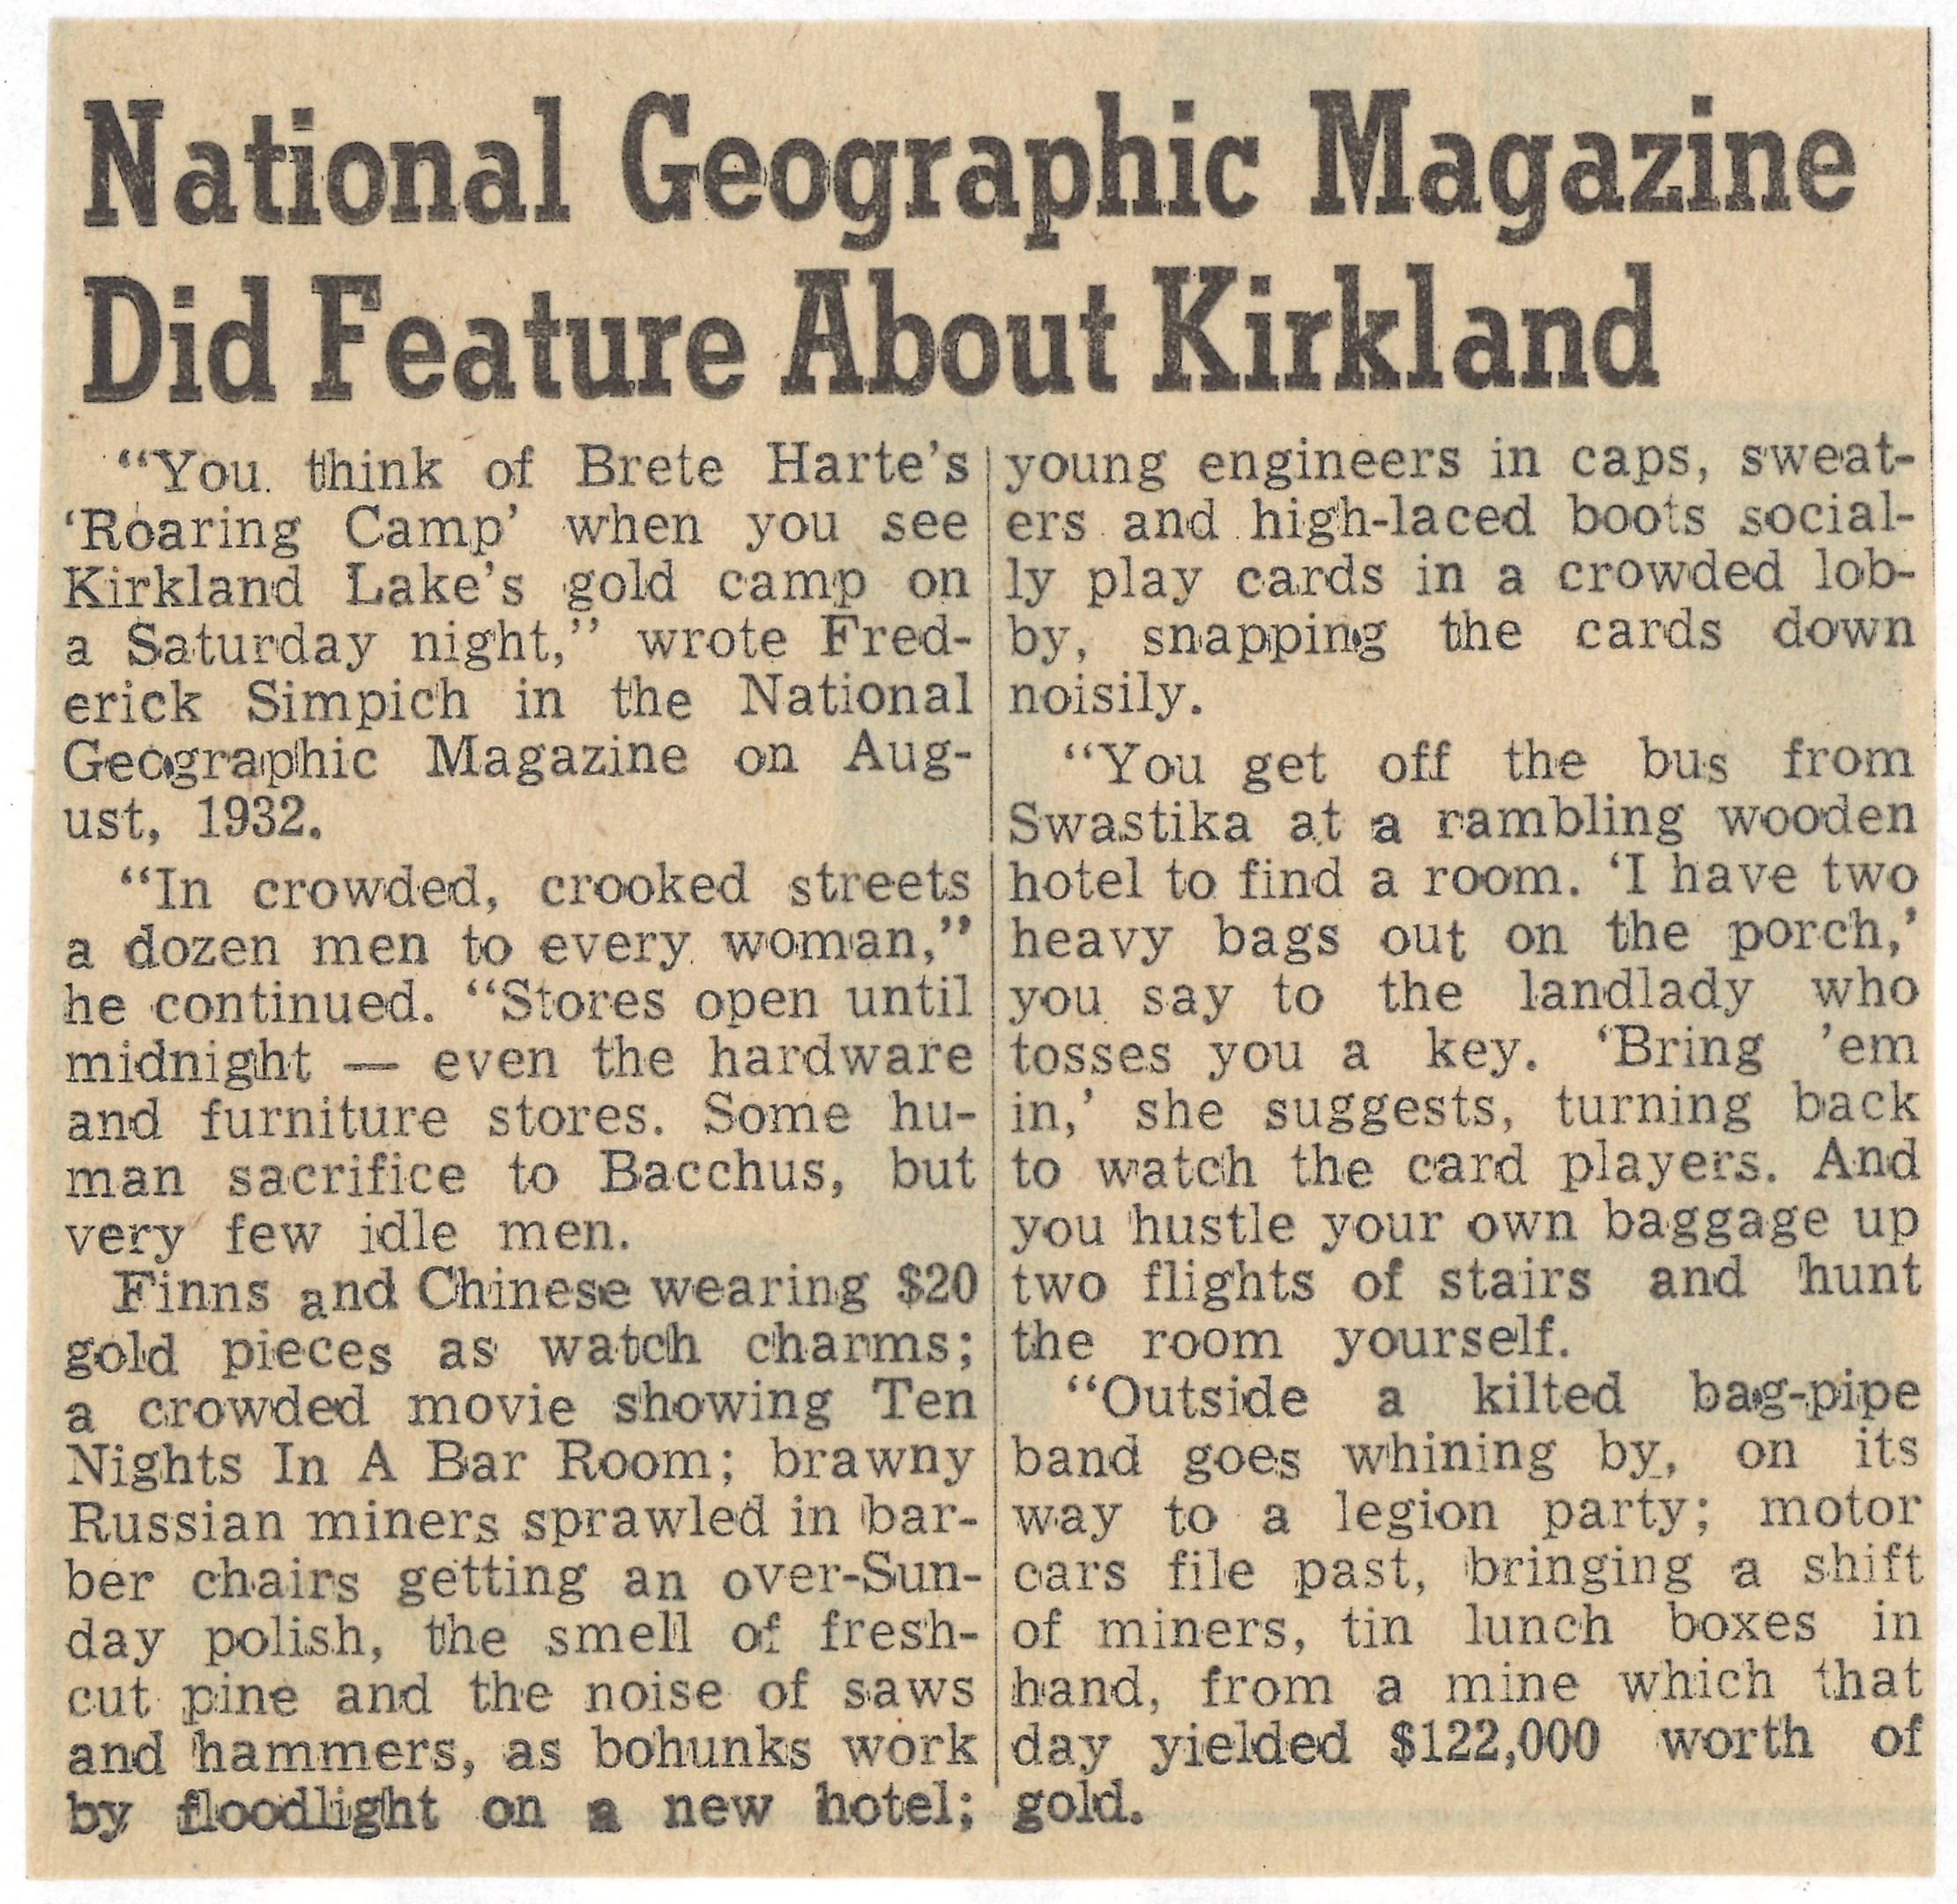 Image of a newspaper clipping about the gold mining boom in Kirkland Lake from 1932.